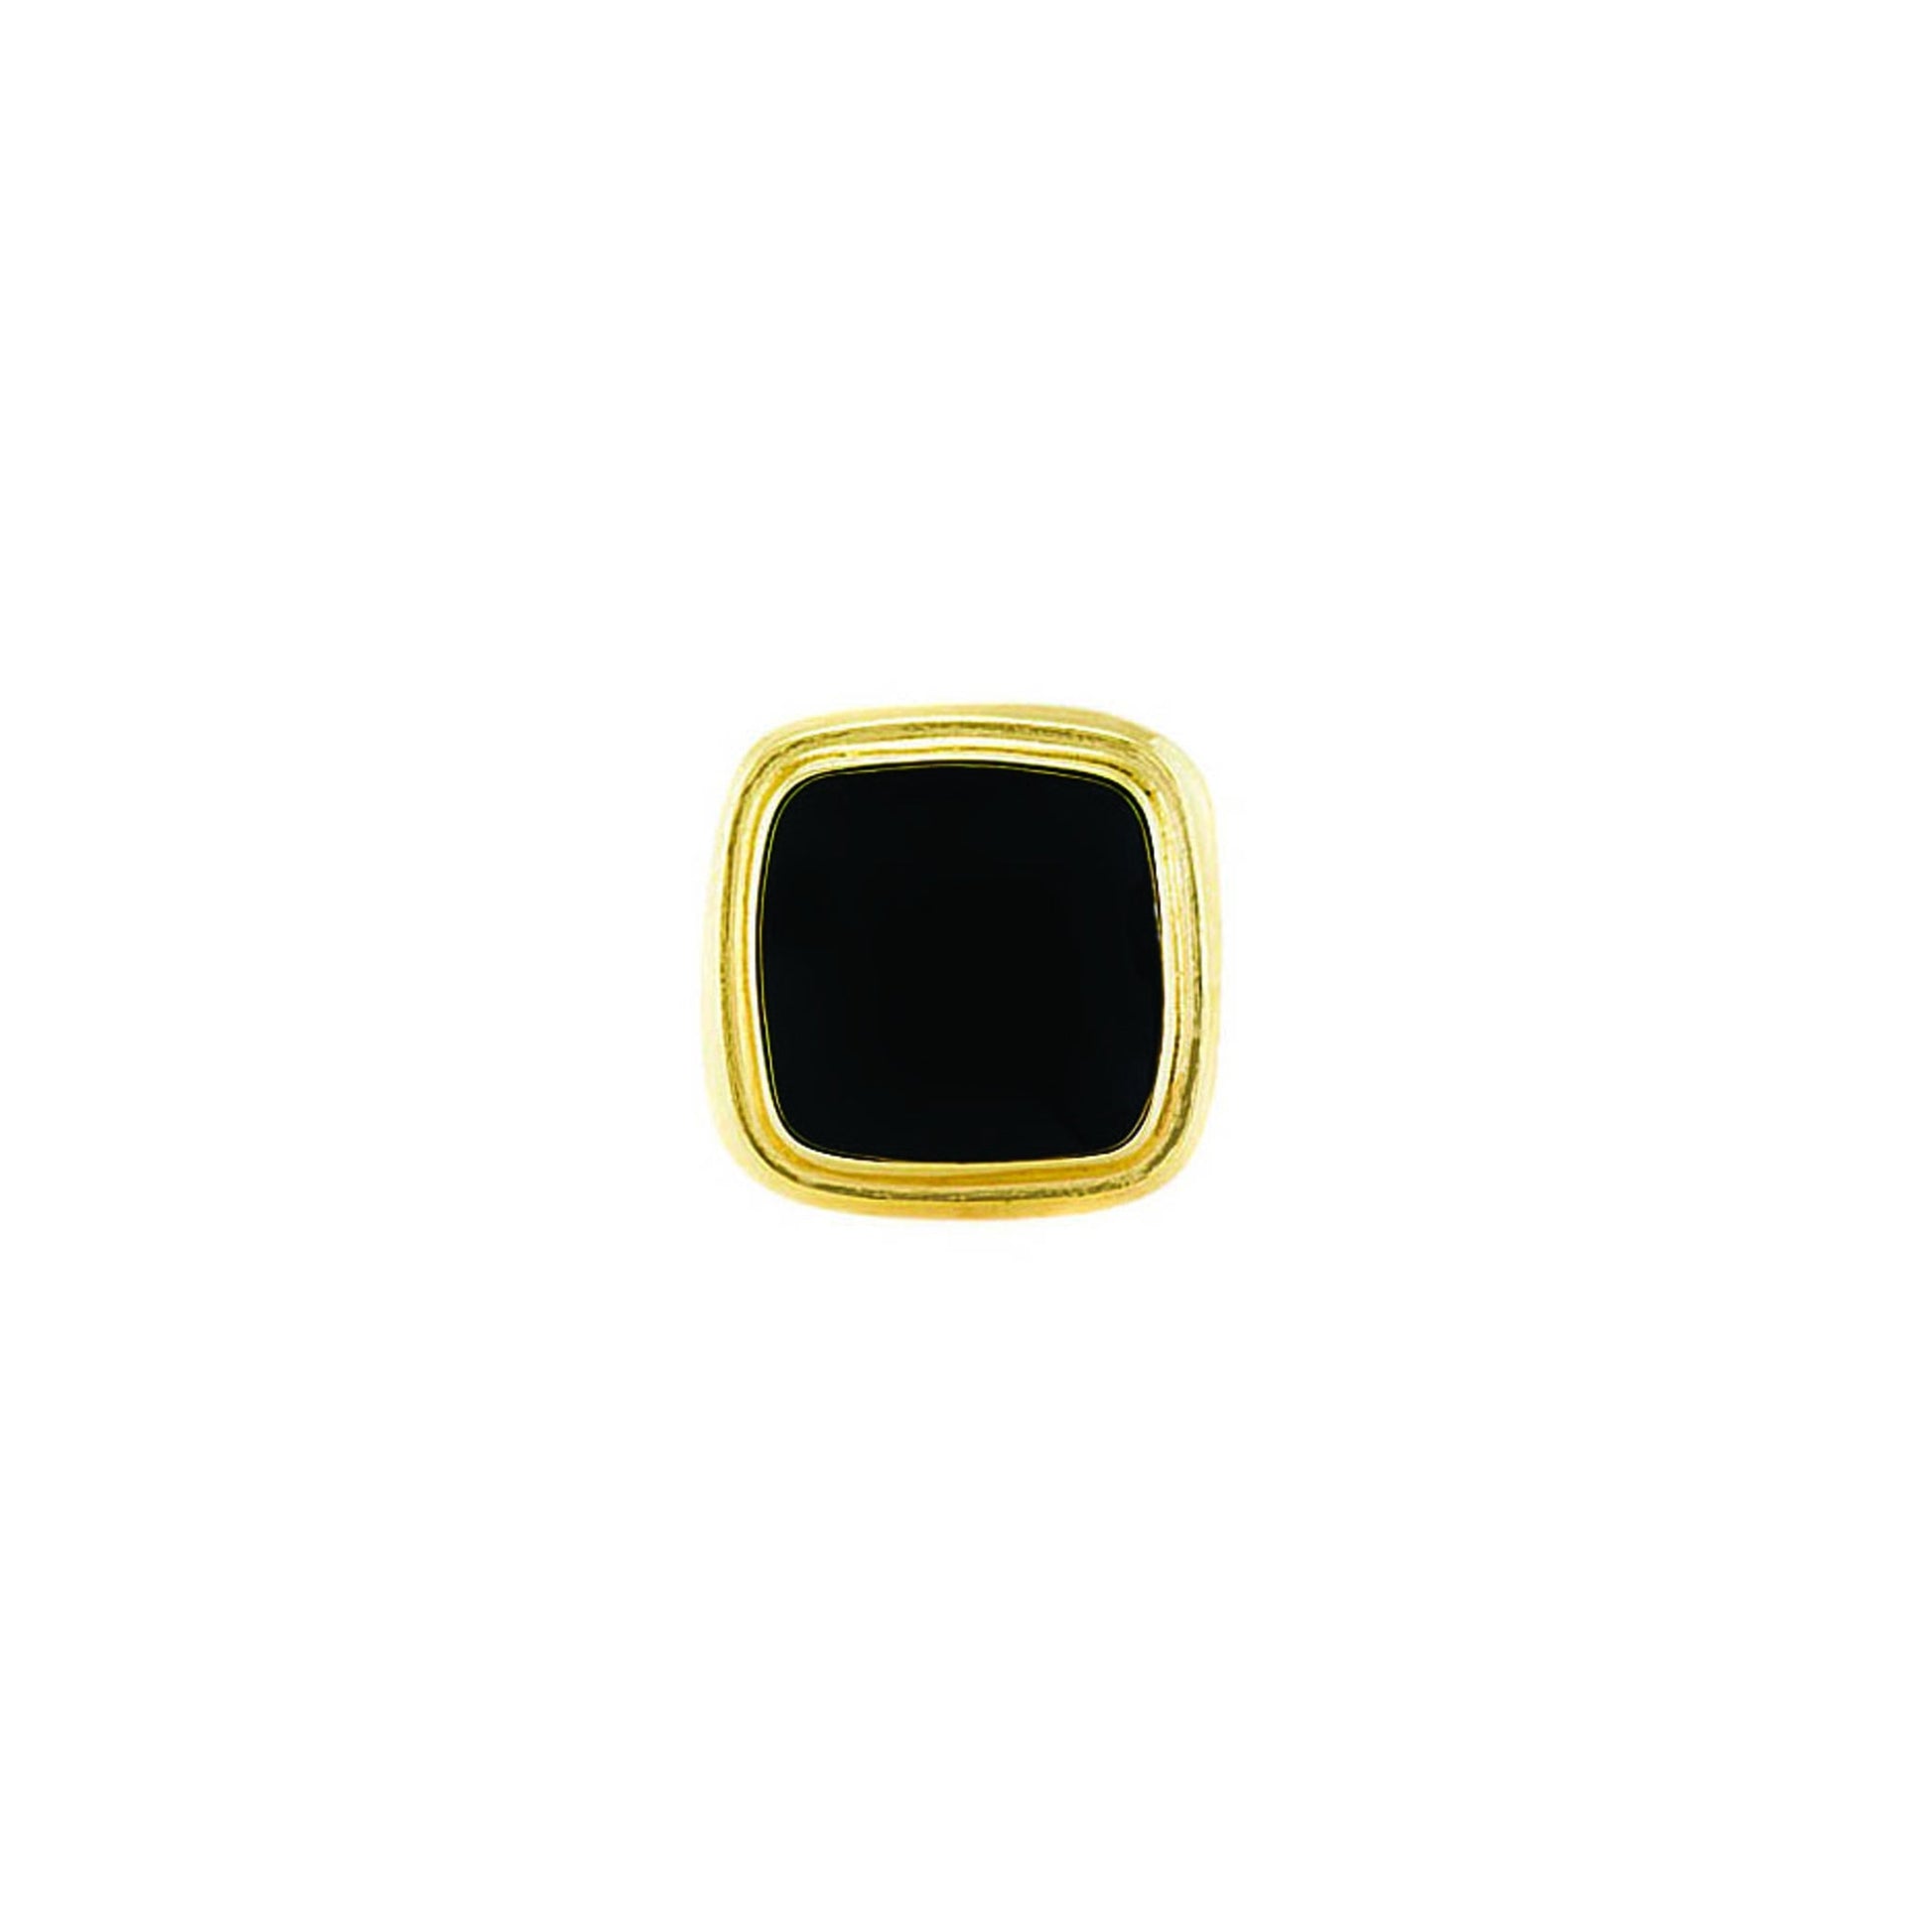 A simulated black onyx accent tie tack displayed on a neutral white background.